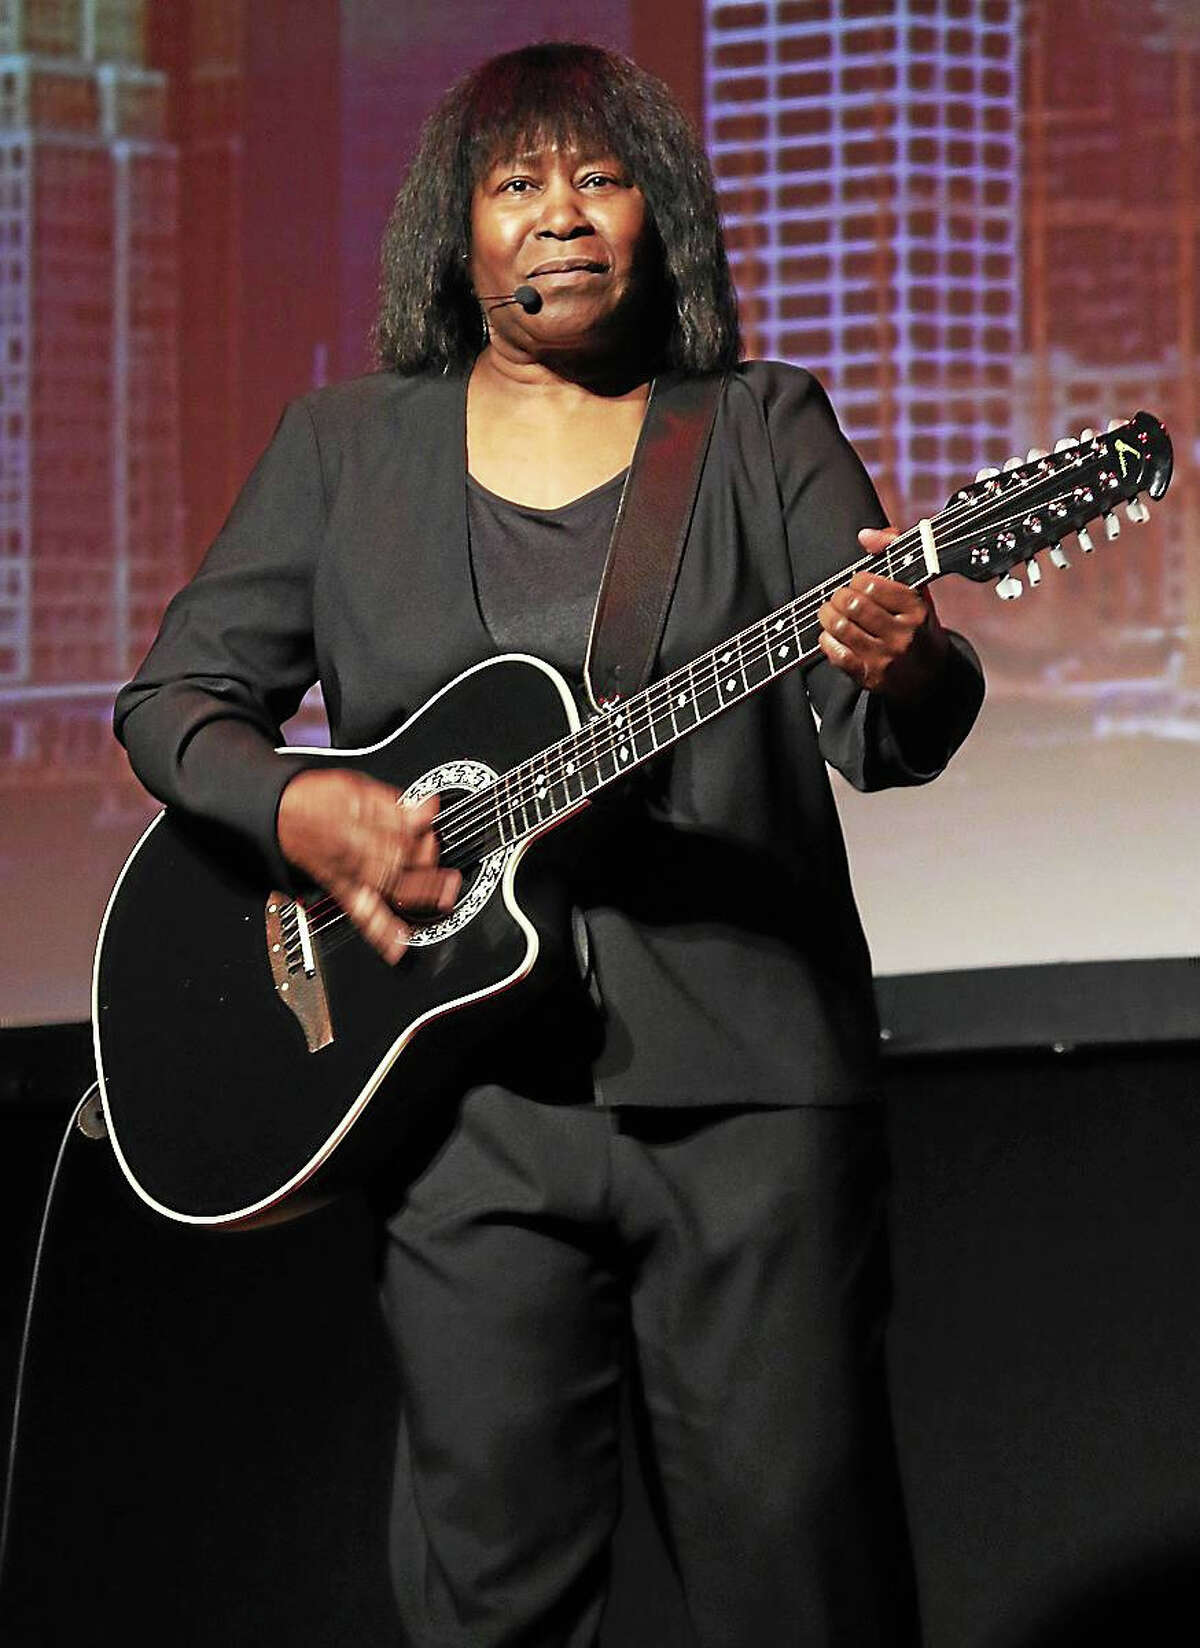 Photo by John AtashianBritish singer, songwriter and guitarist Joan Armatrading is shown performing on stage at Infinity Music Hall during her”concert appearance on Oct. 30. Joan is a three-time Grammy Award nominee, Armatrading was nominated twice for Brit Awards as Best Female Artist. She also received an Ivor Novello Award for Outstanding Contemporary Song Collection in 1996. She is currently on her final world tour. To learn more about the long list of entertainment coming to Infinity Music Hall you can visit www.infinityhall.com